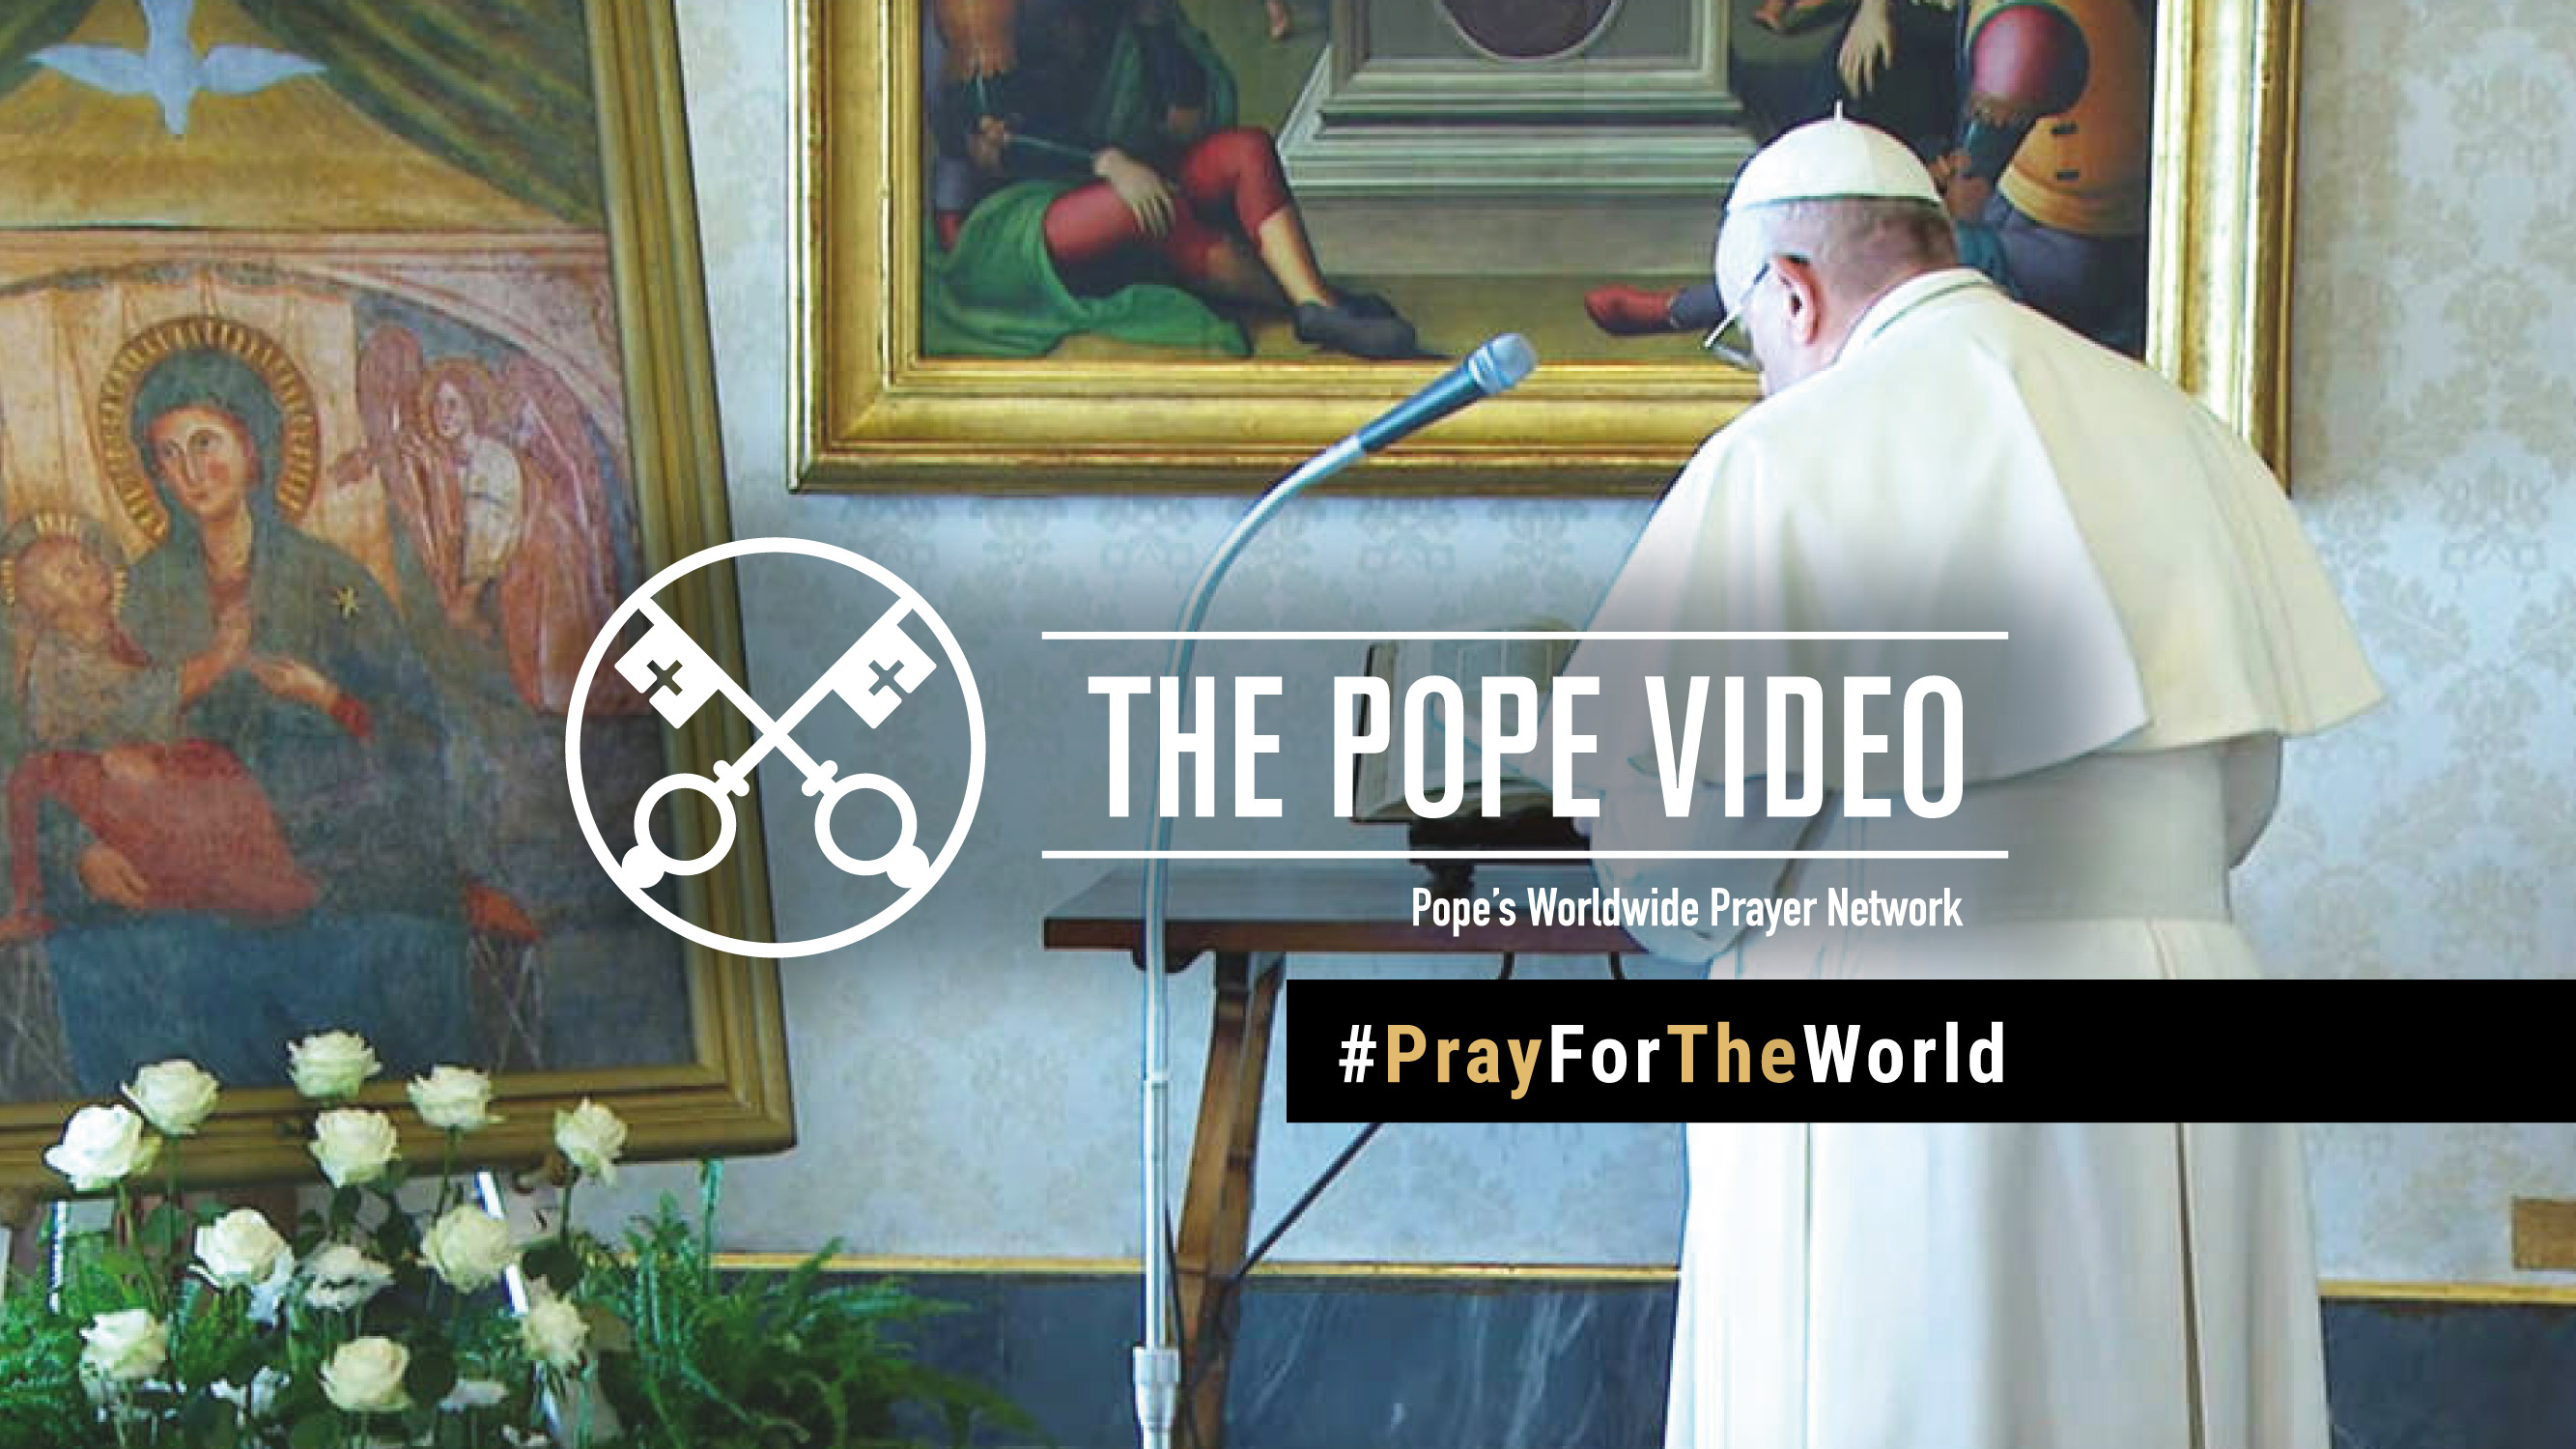 Pope Francis’ special video to pray for an end to the pandemic #PrayForTheWorld